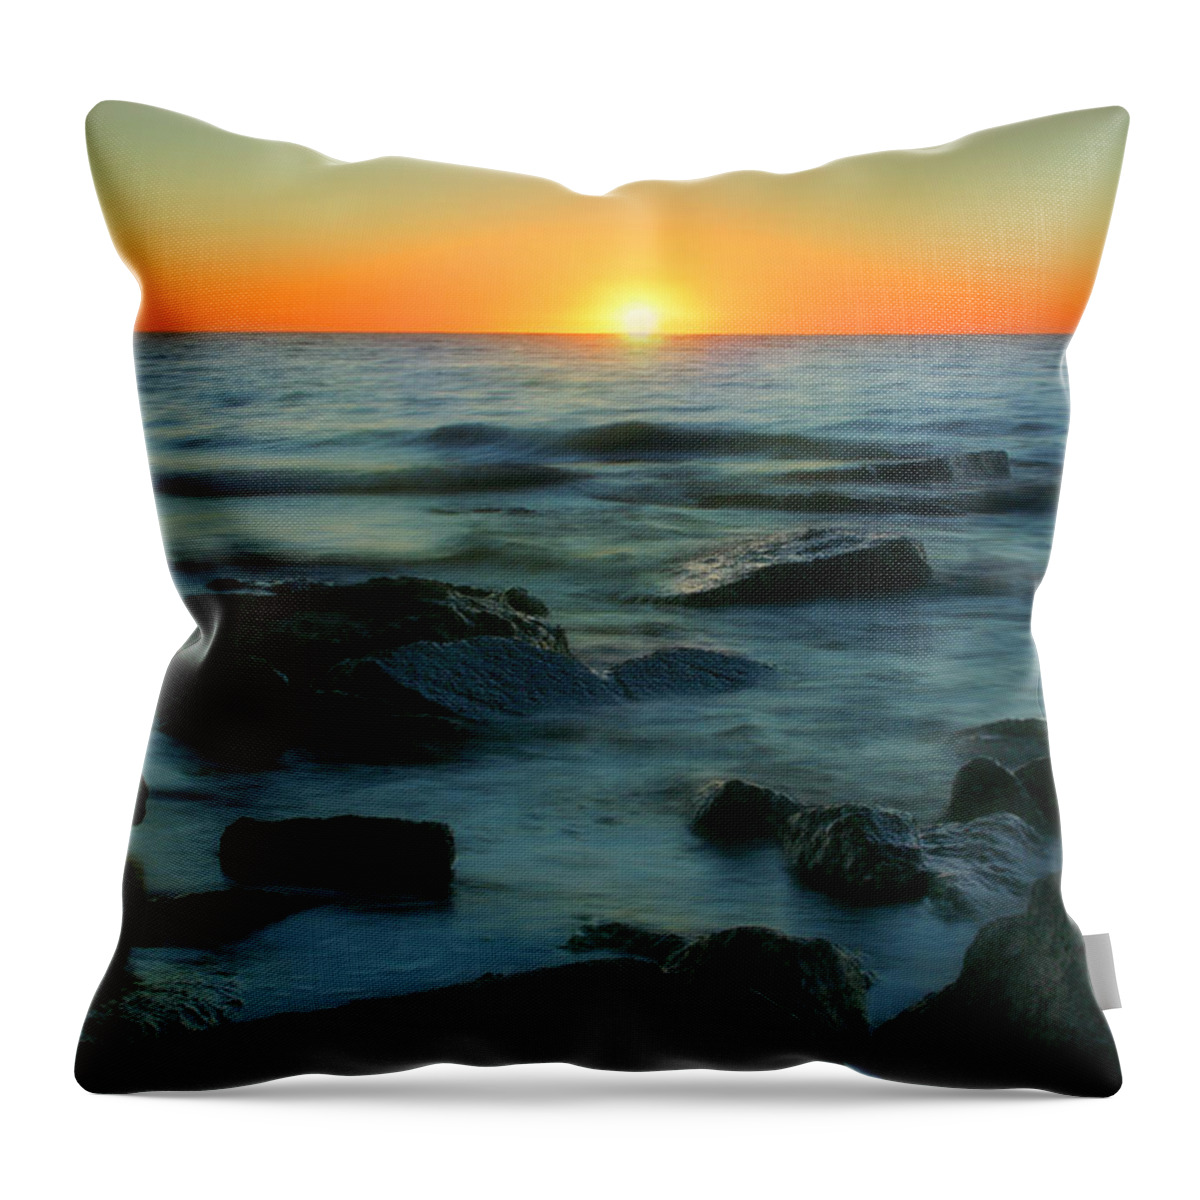 Lake Erie Throw Pillow featuring the photograph Lake Erie Sunset by Cindy Haggerty